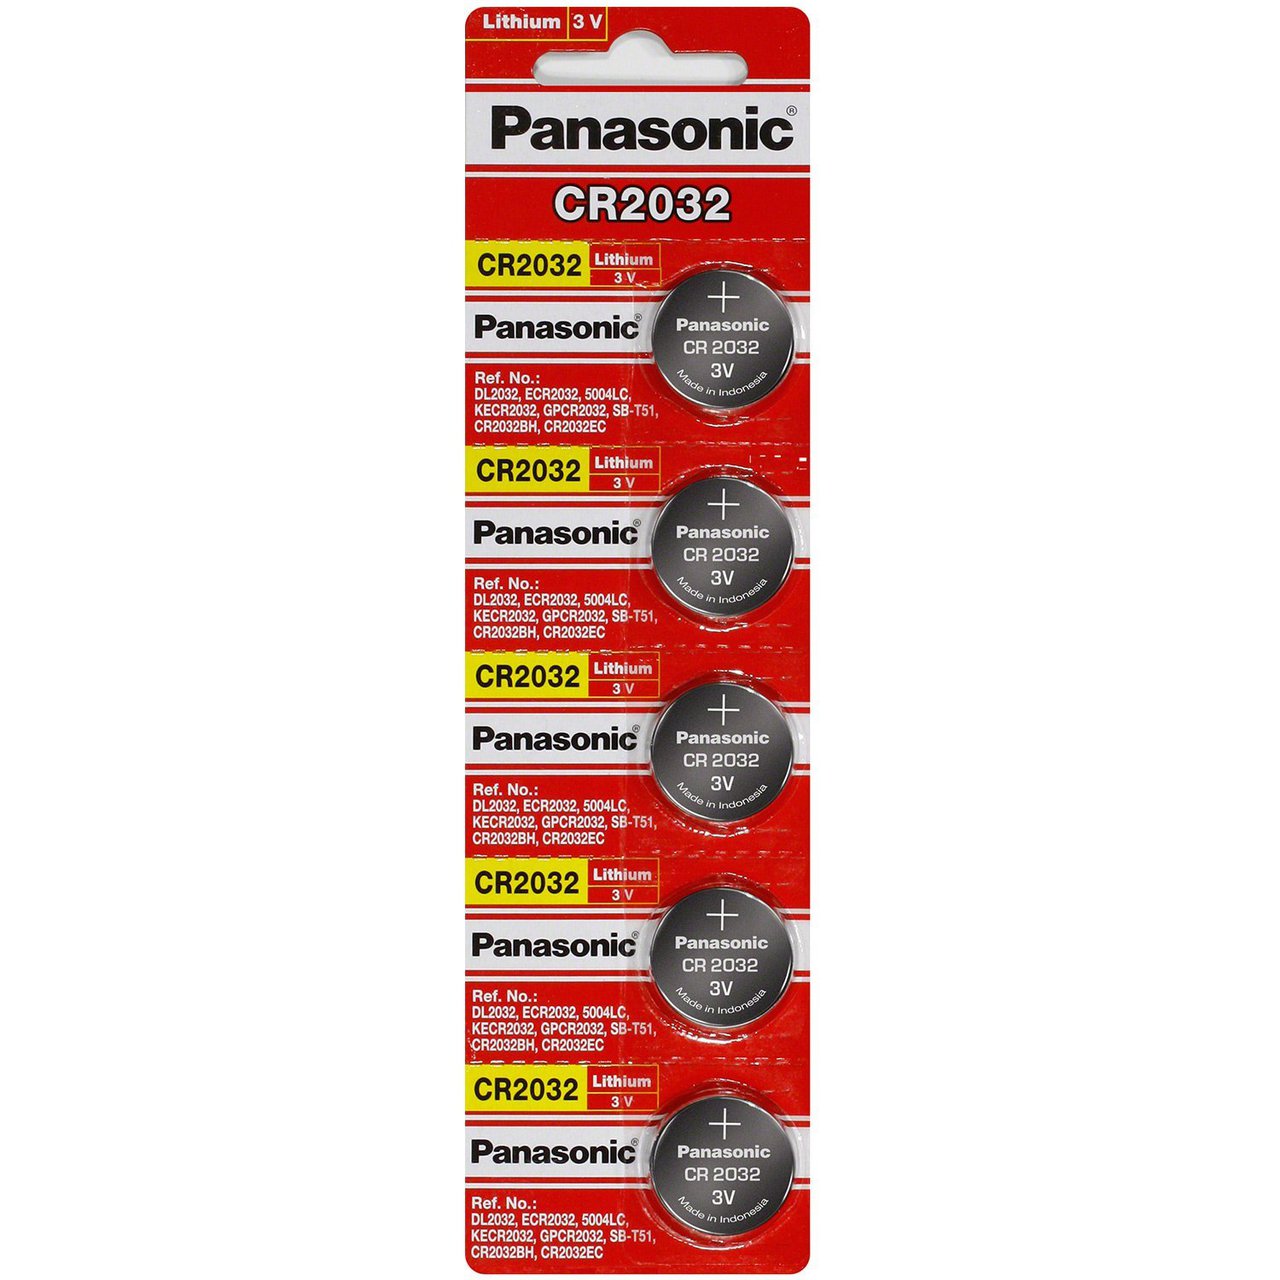 Panasonic CR2032 3V Lithium Coin Battery - 5 Pack + FREE SHIPPING!